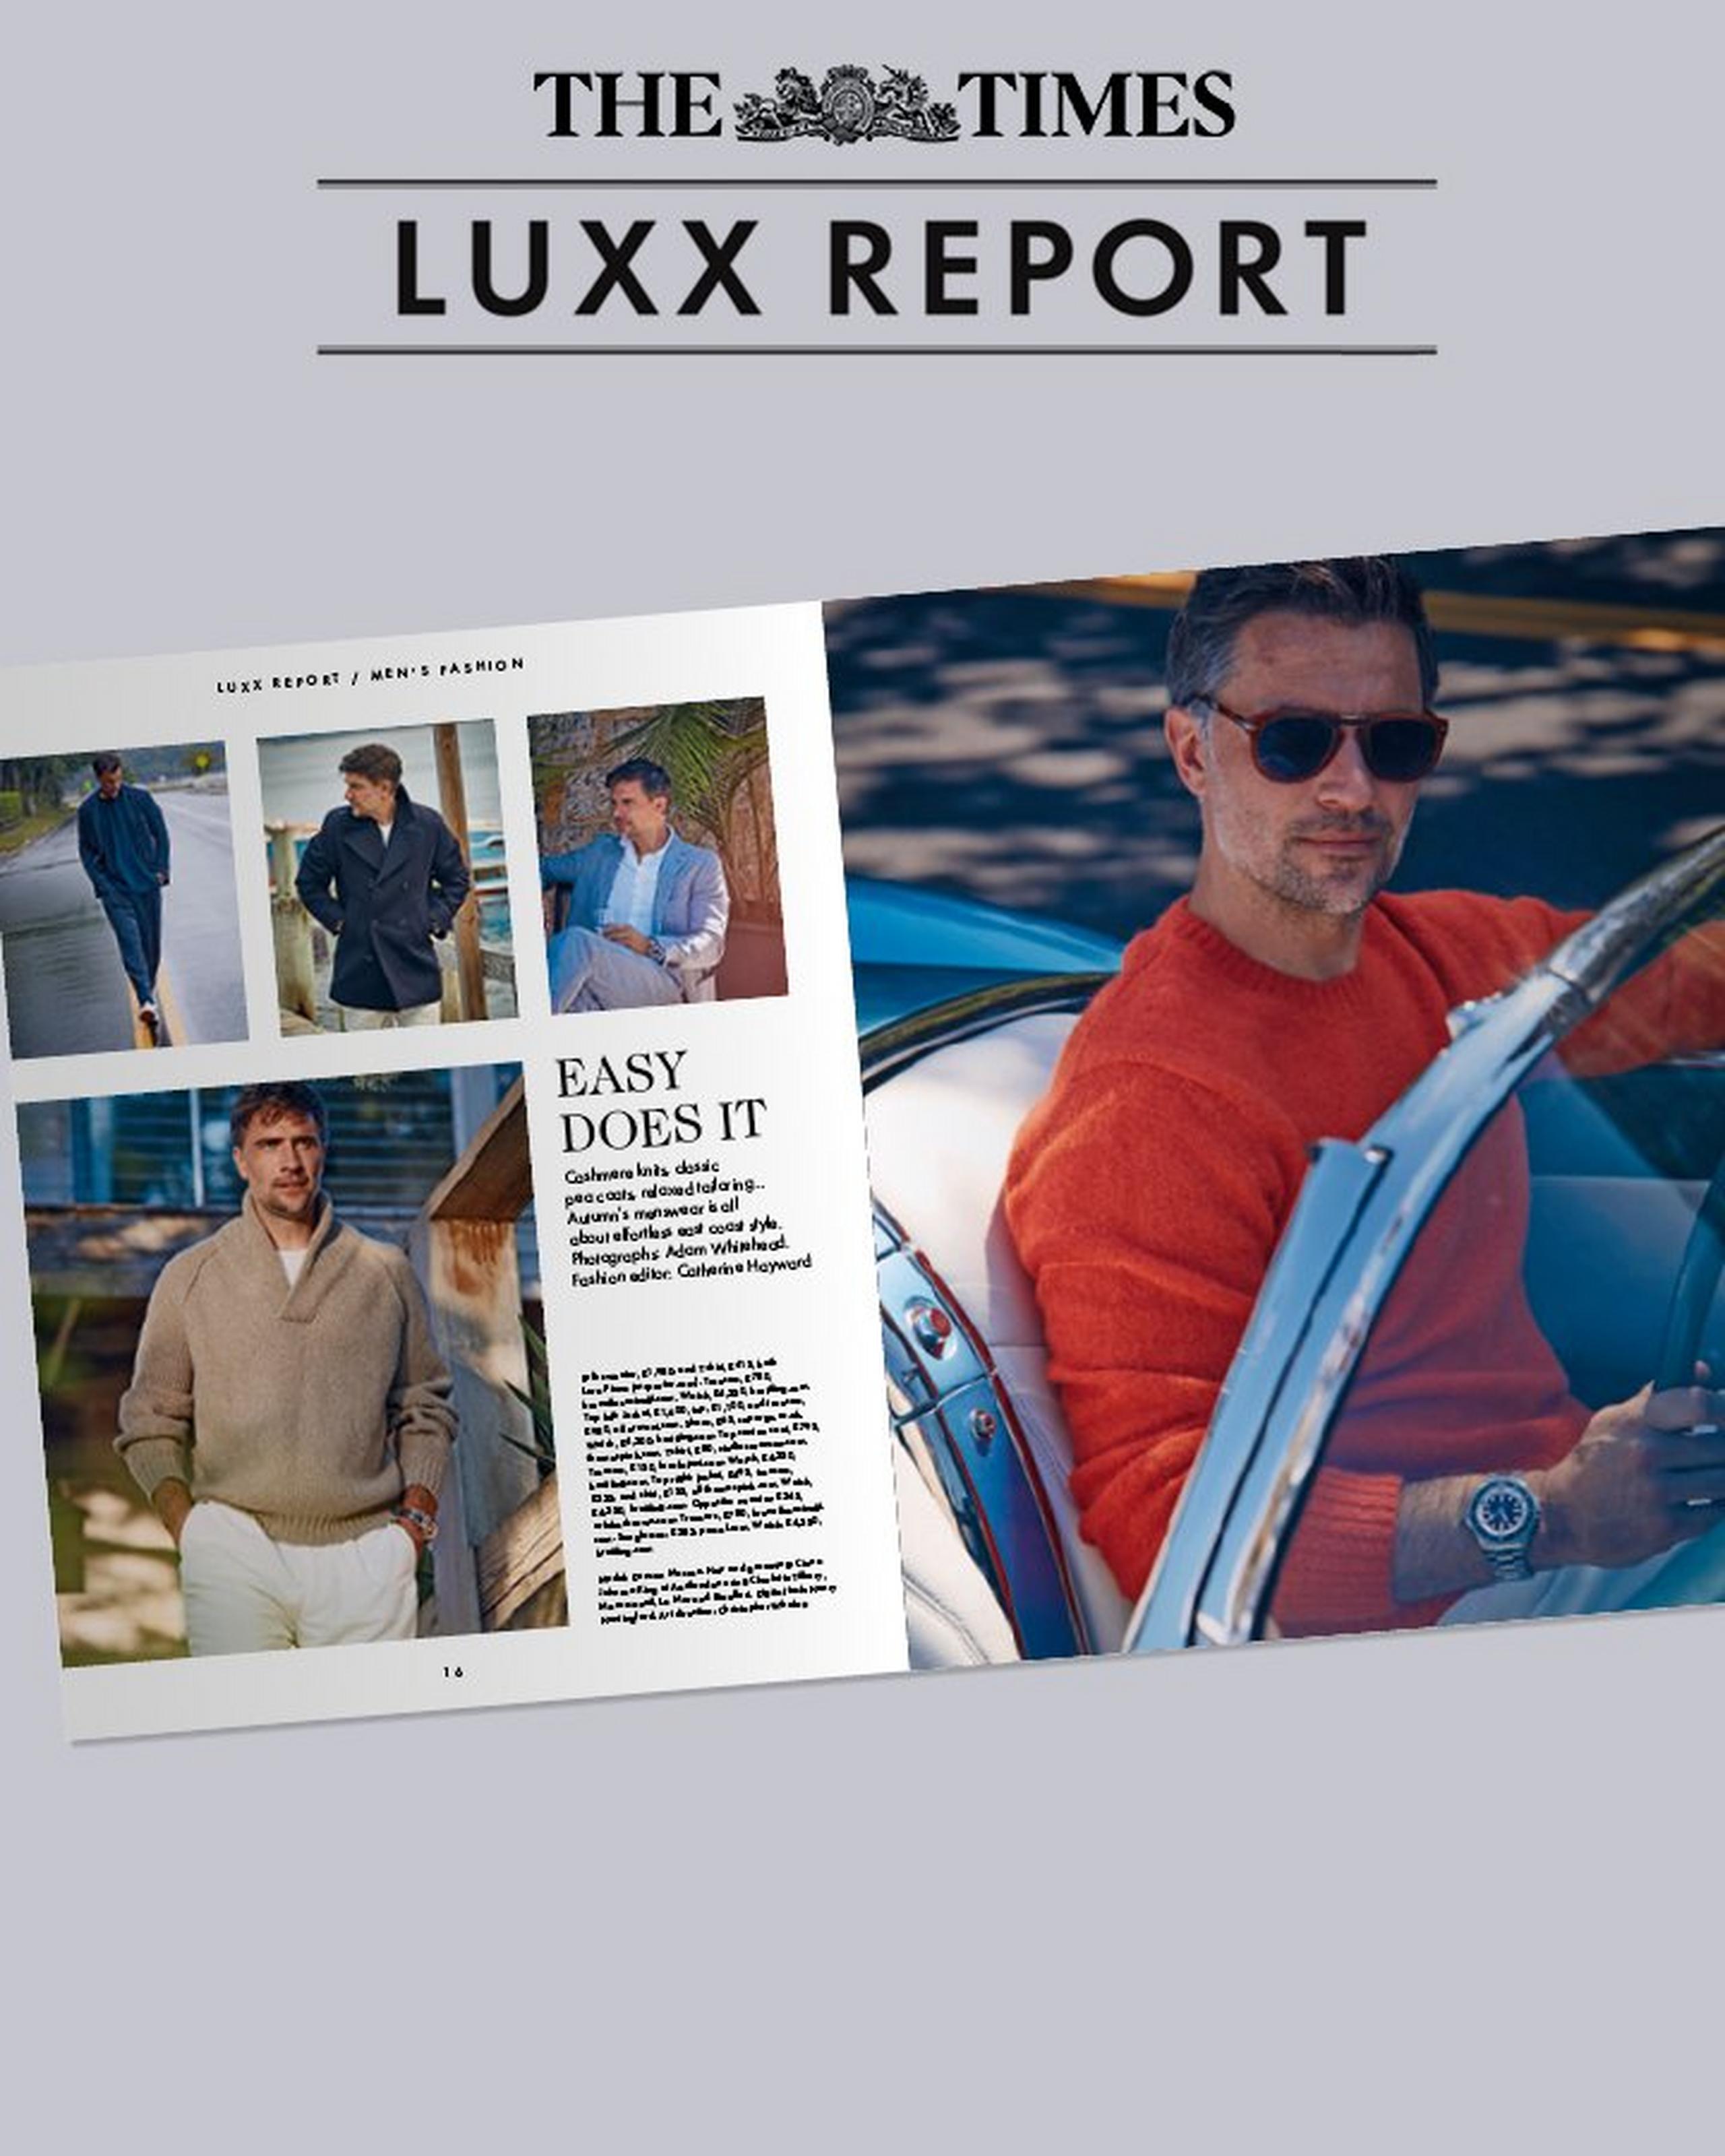 Thomas Pink on the cover of The Times Luxx Report